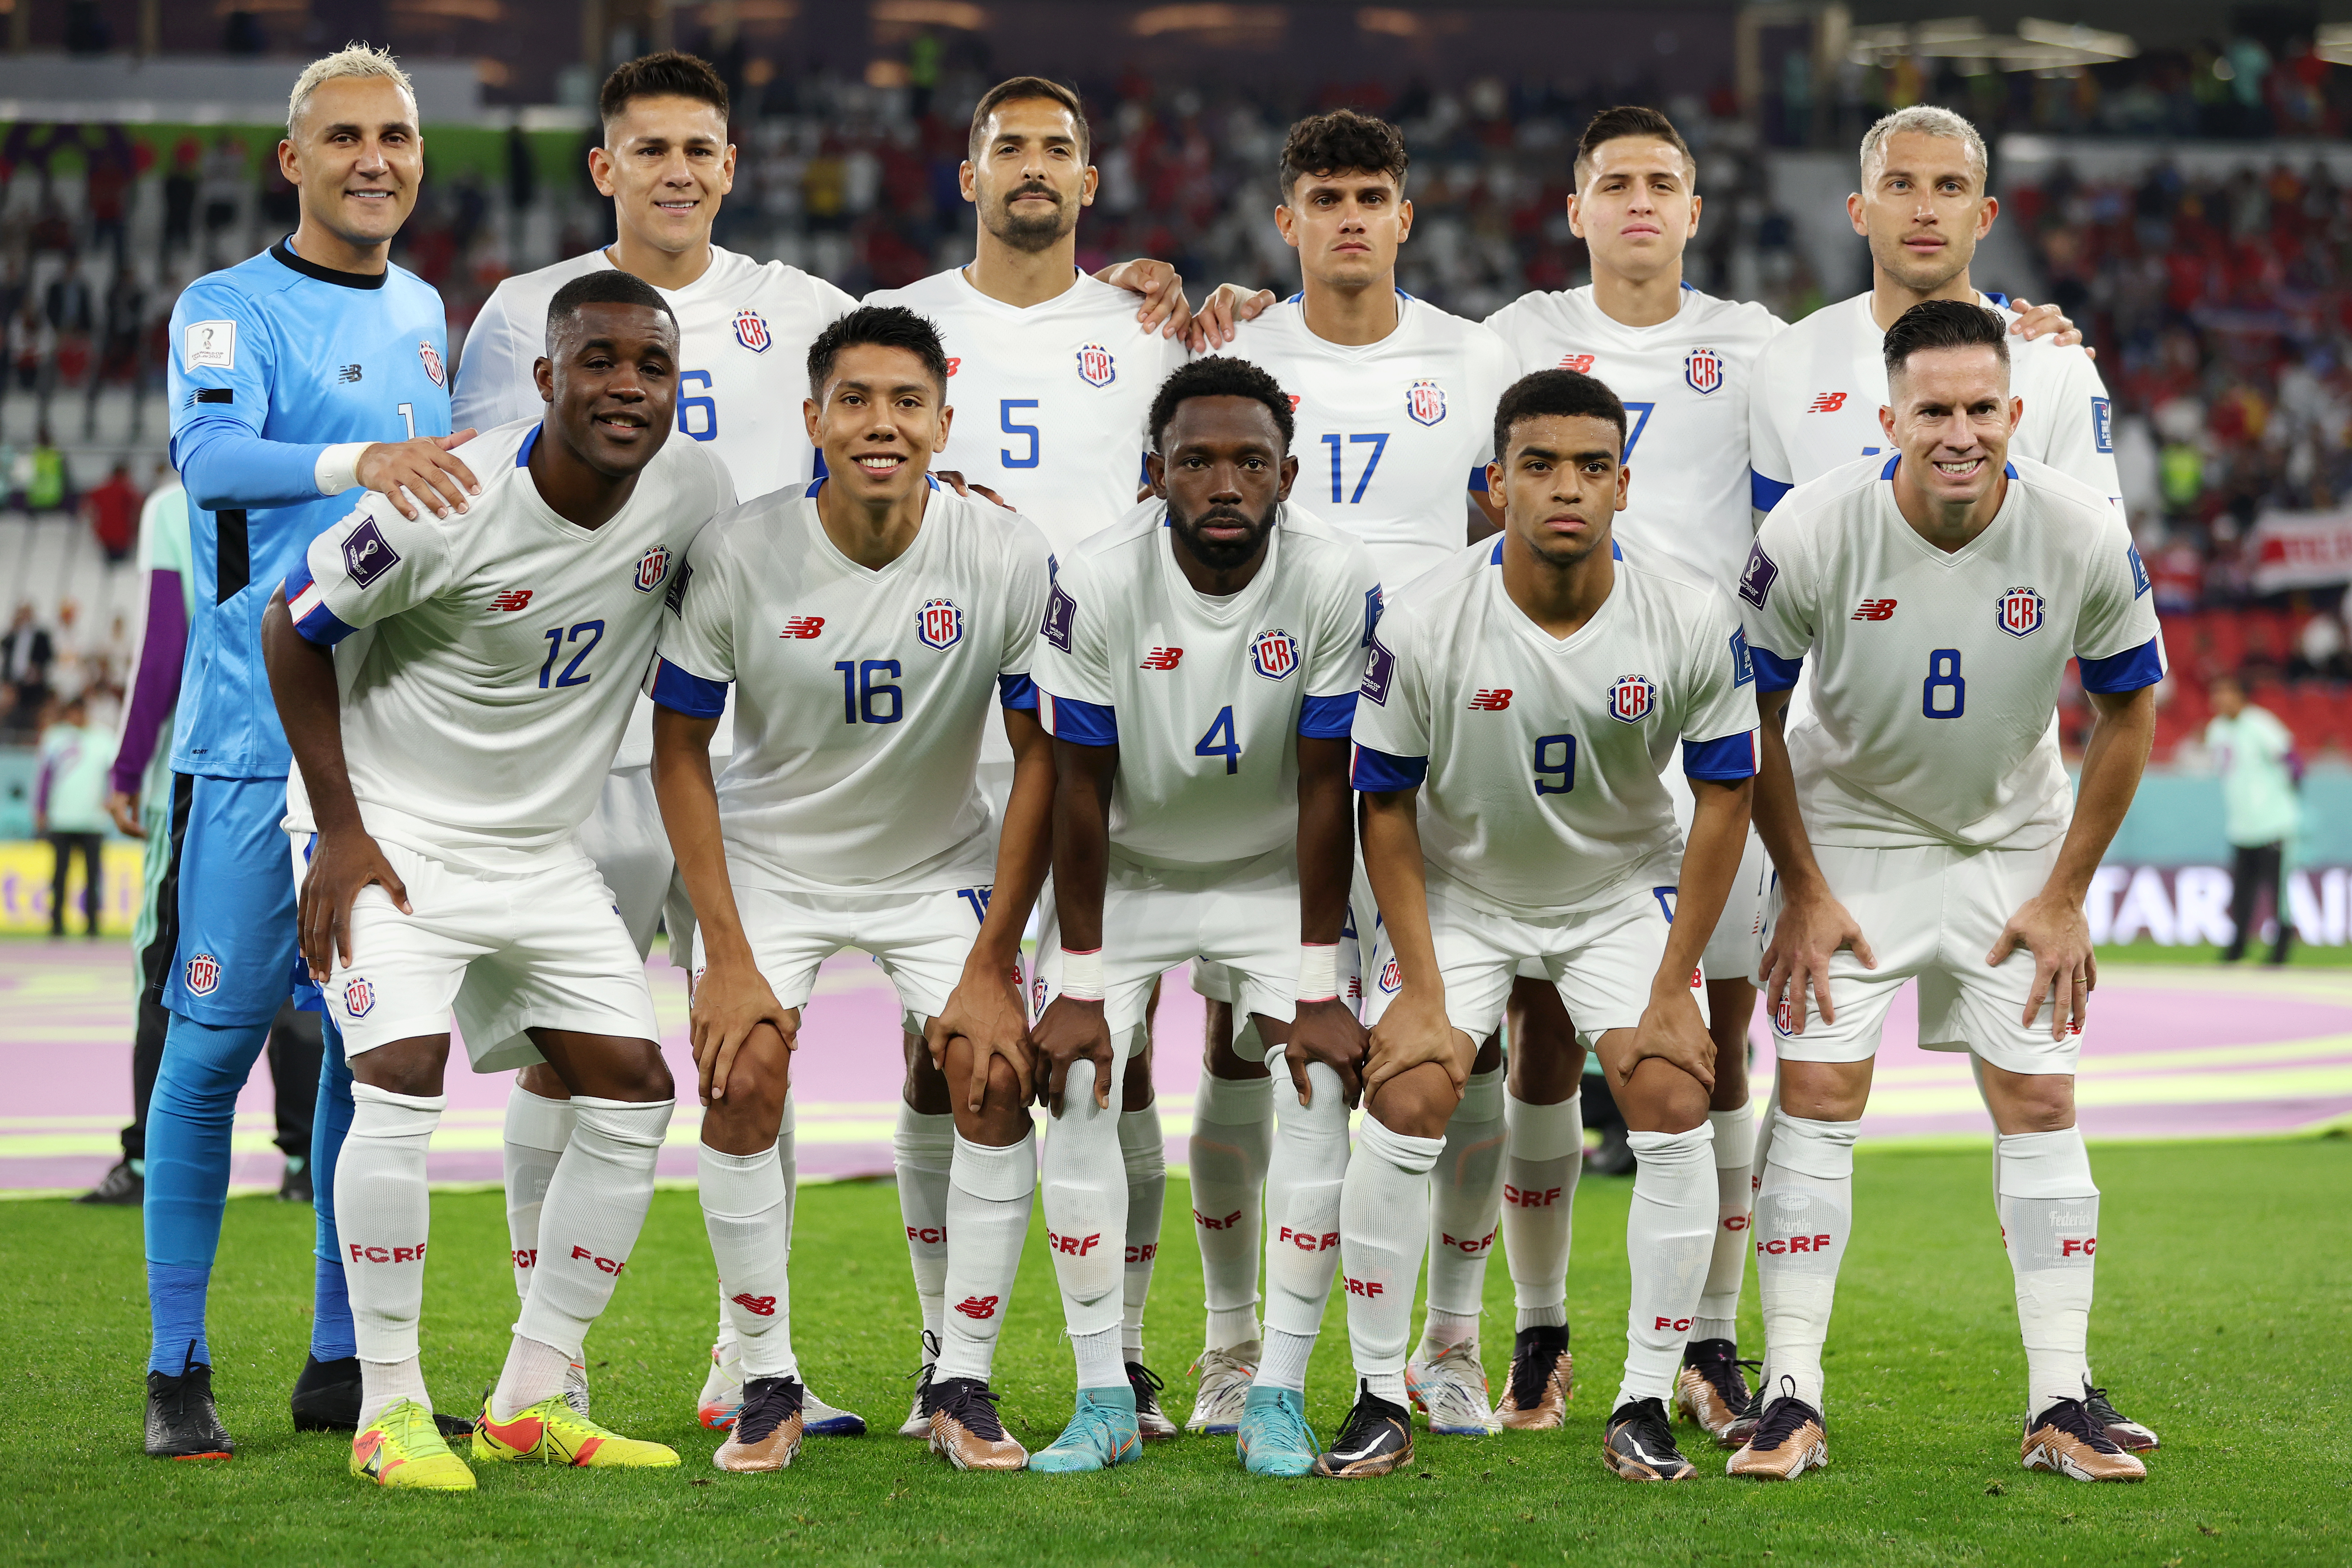 Costa Rica players line up for a team photo prior to the FIFA World Cup Qatar 2022 Group E match between Spain and Costa Rica at Al Thumama Stadium on November 23, 2022 in Doha, Qatar.